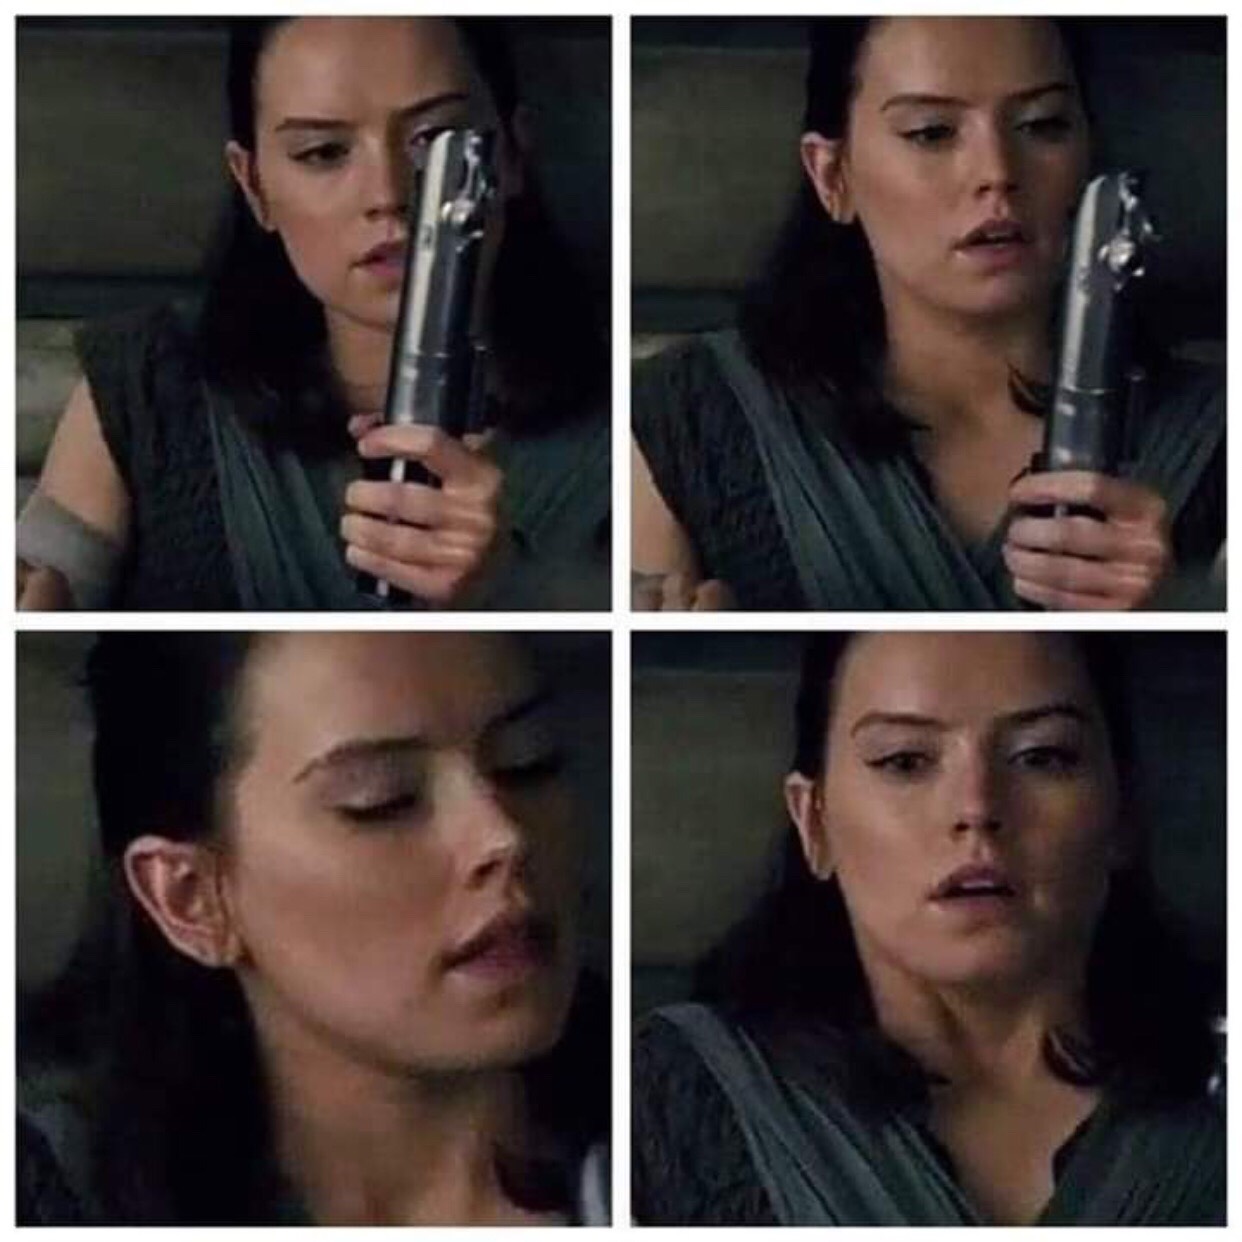 Rey trying her lightsaber as if it is a dildo type toy